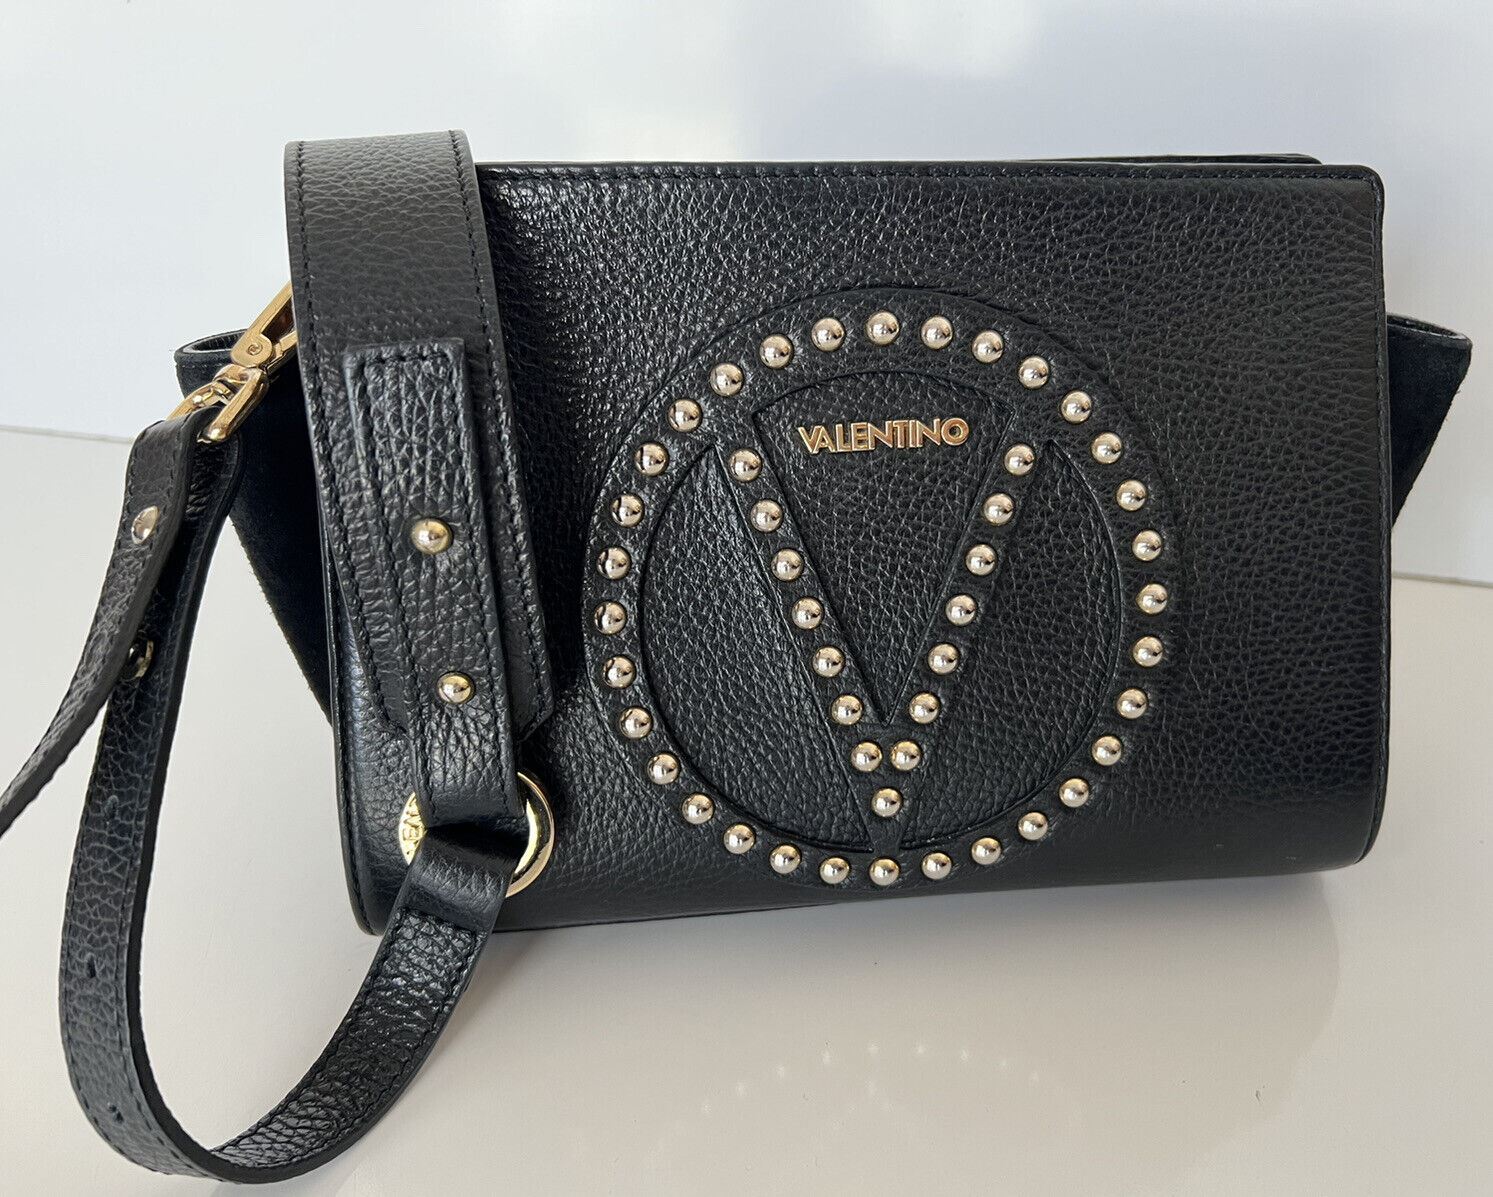 Mario Valentino Leather Chain Black Shoulder Strap studded Bag Made in Italy